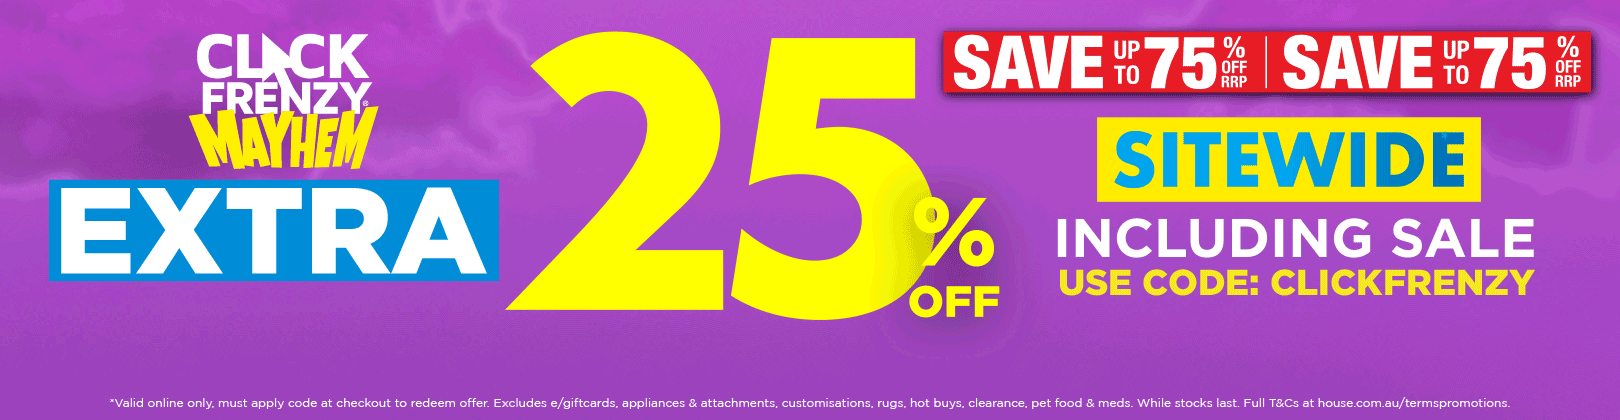 Click Frenzy - Save extra 25% OFF sitewide